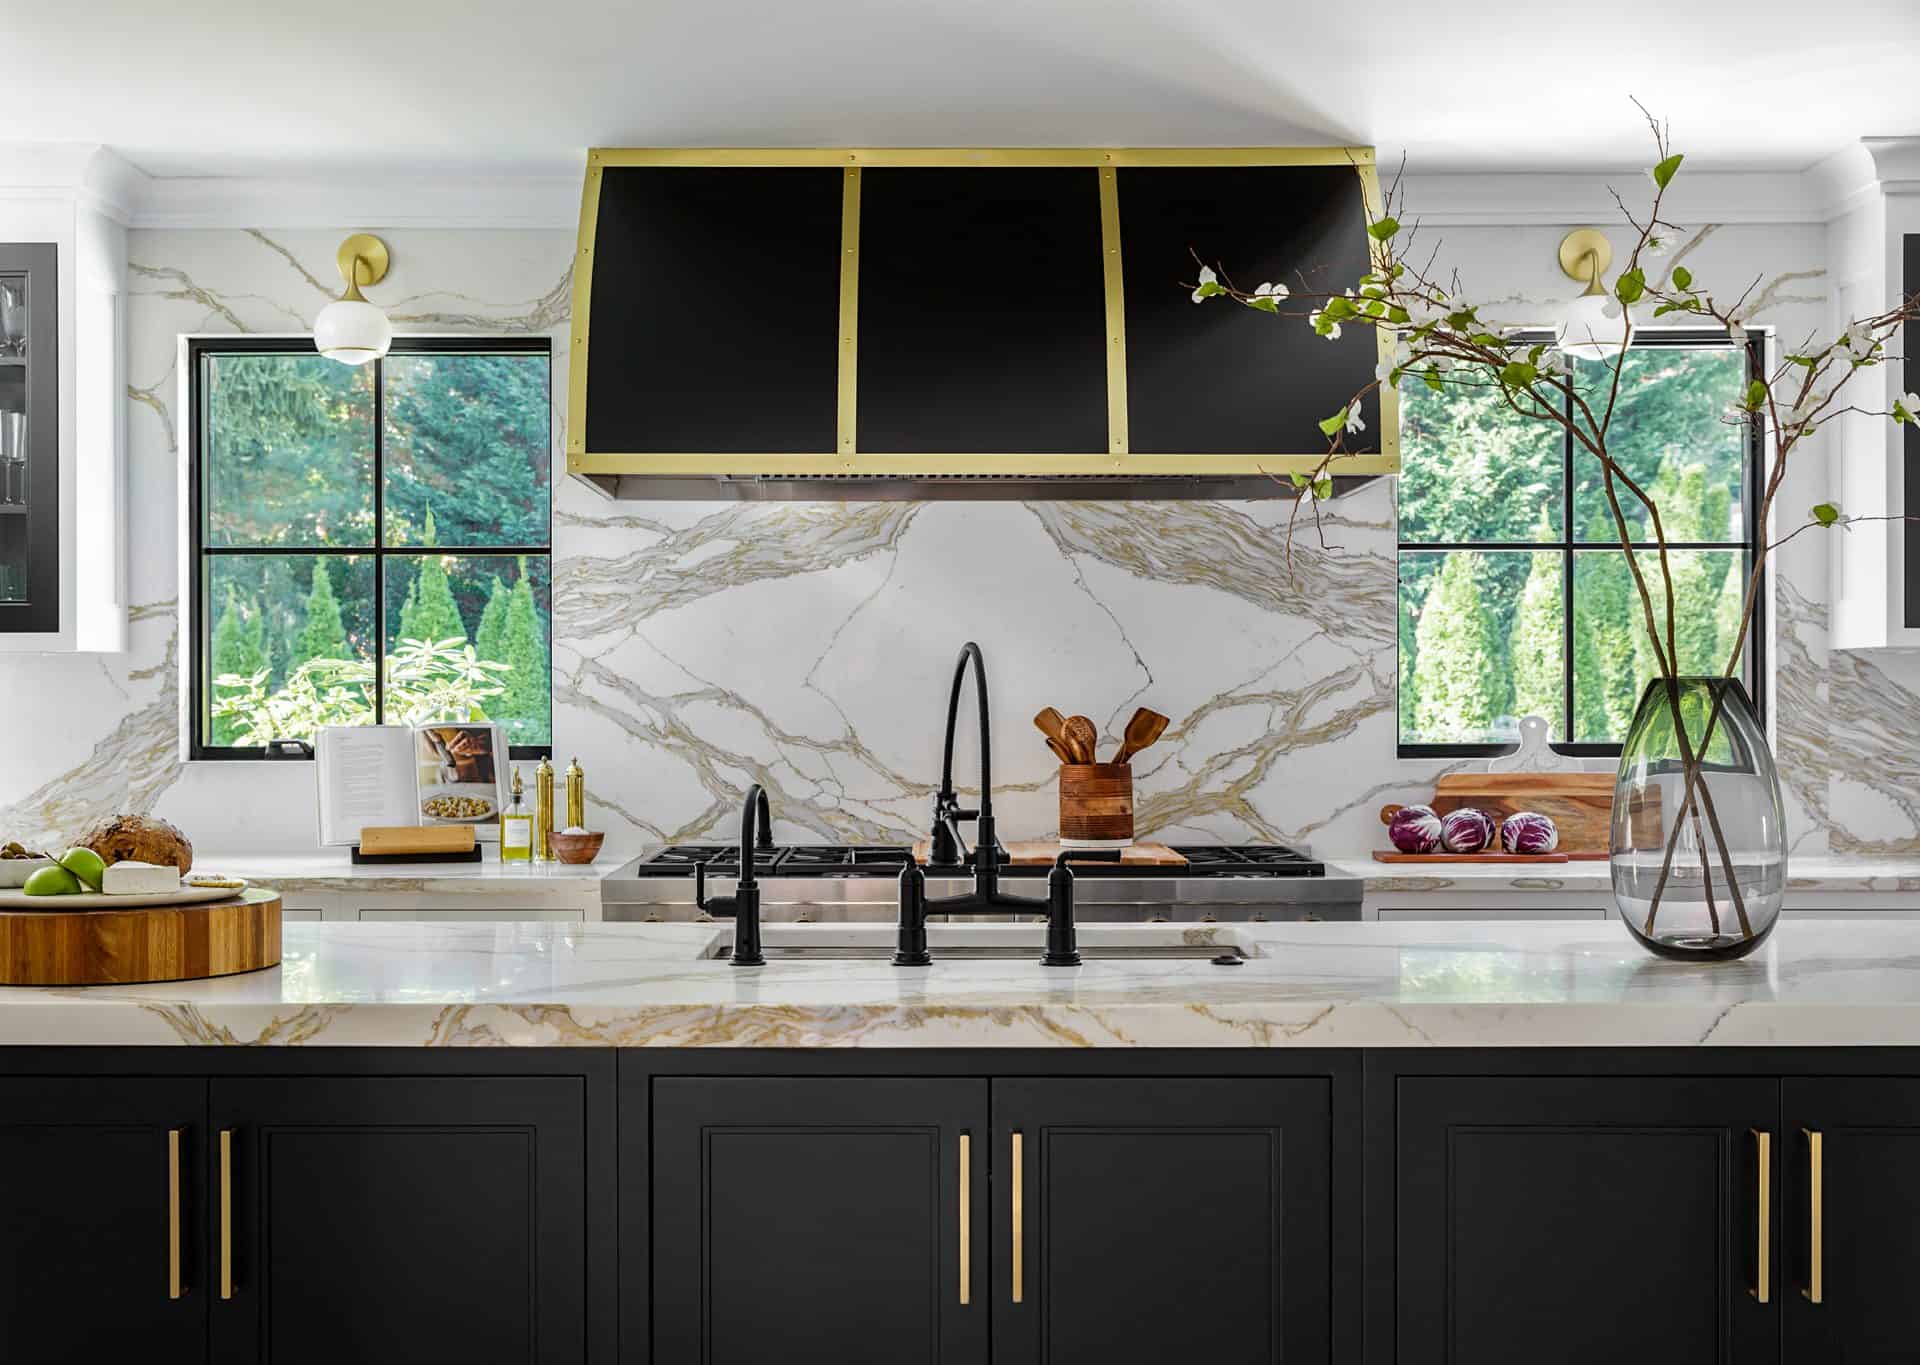 Close up of black kitchen island cabinetry with gold handles, Calacatta Gold countertops and large black and gold hood over the range